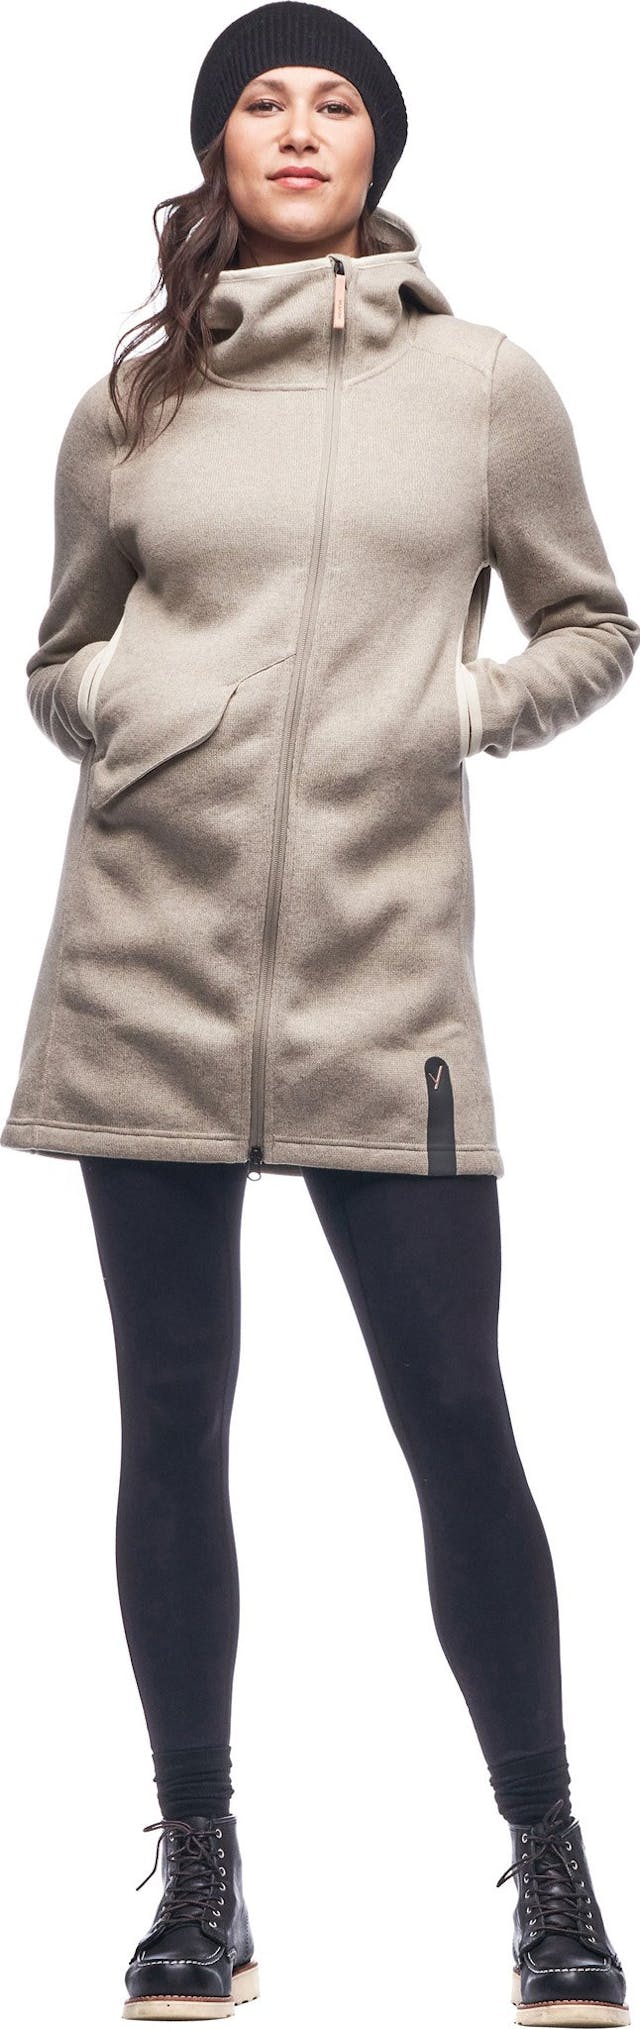 Product image for Naoko Long Full-Zip Thermal Hooded Jacket - Women's